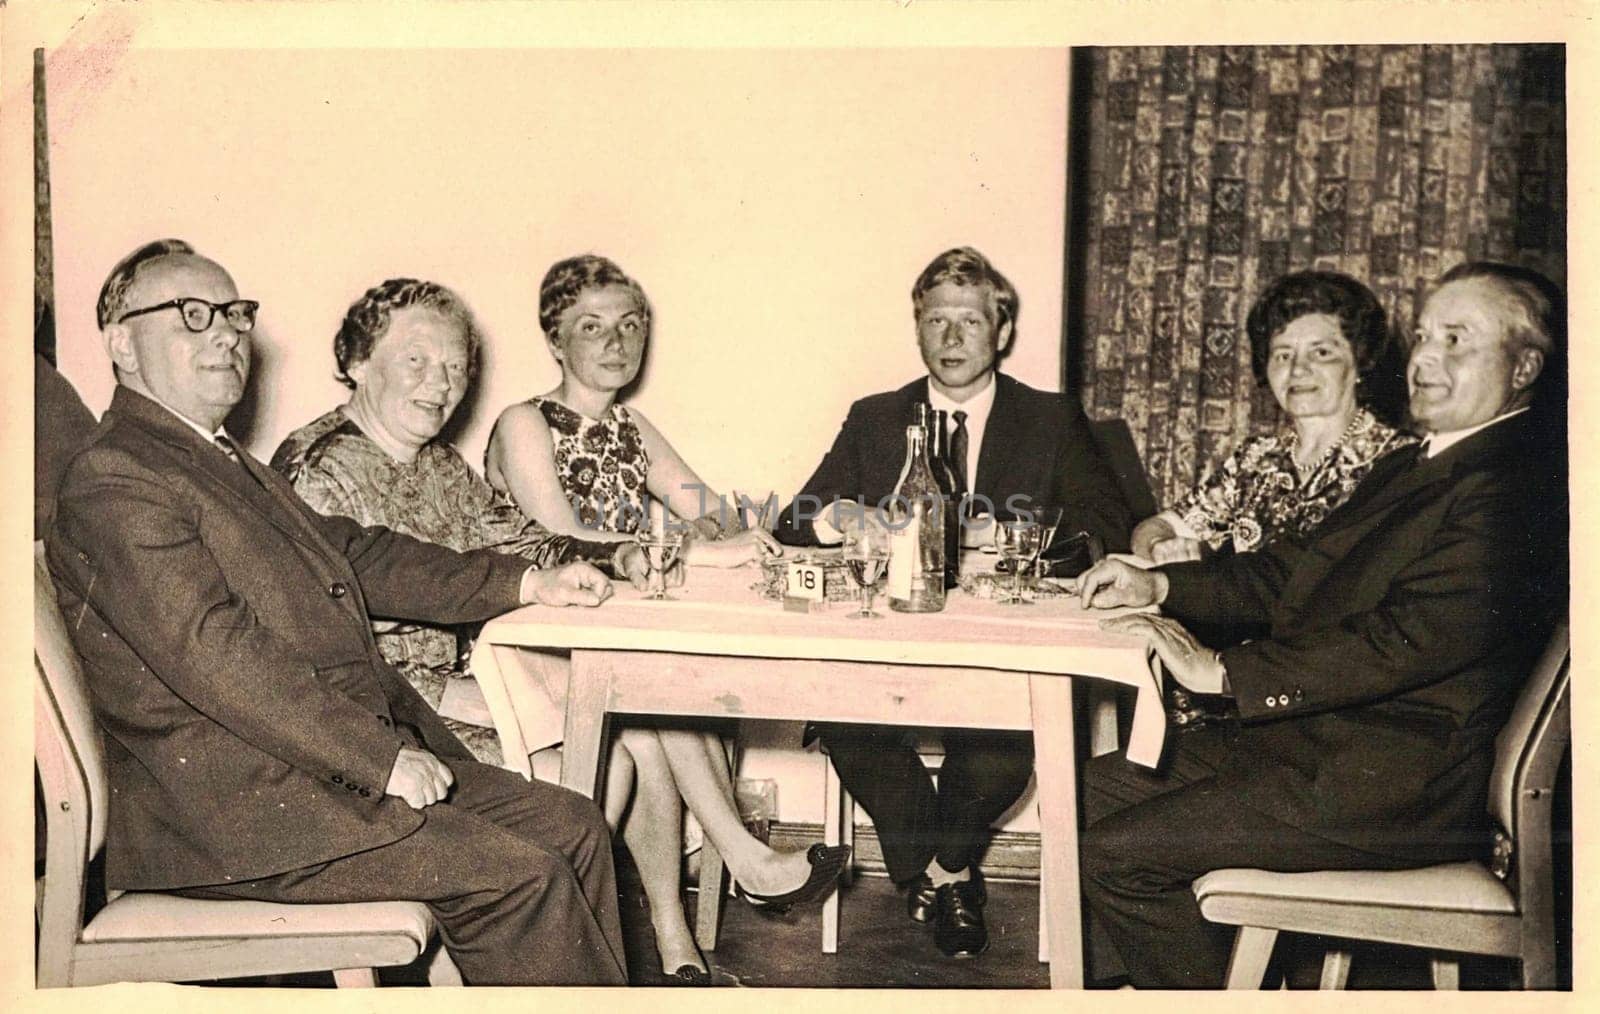 Retro photo shows social event - celebrating of New Year's Eve. Circa 1970s. by roman_nerud